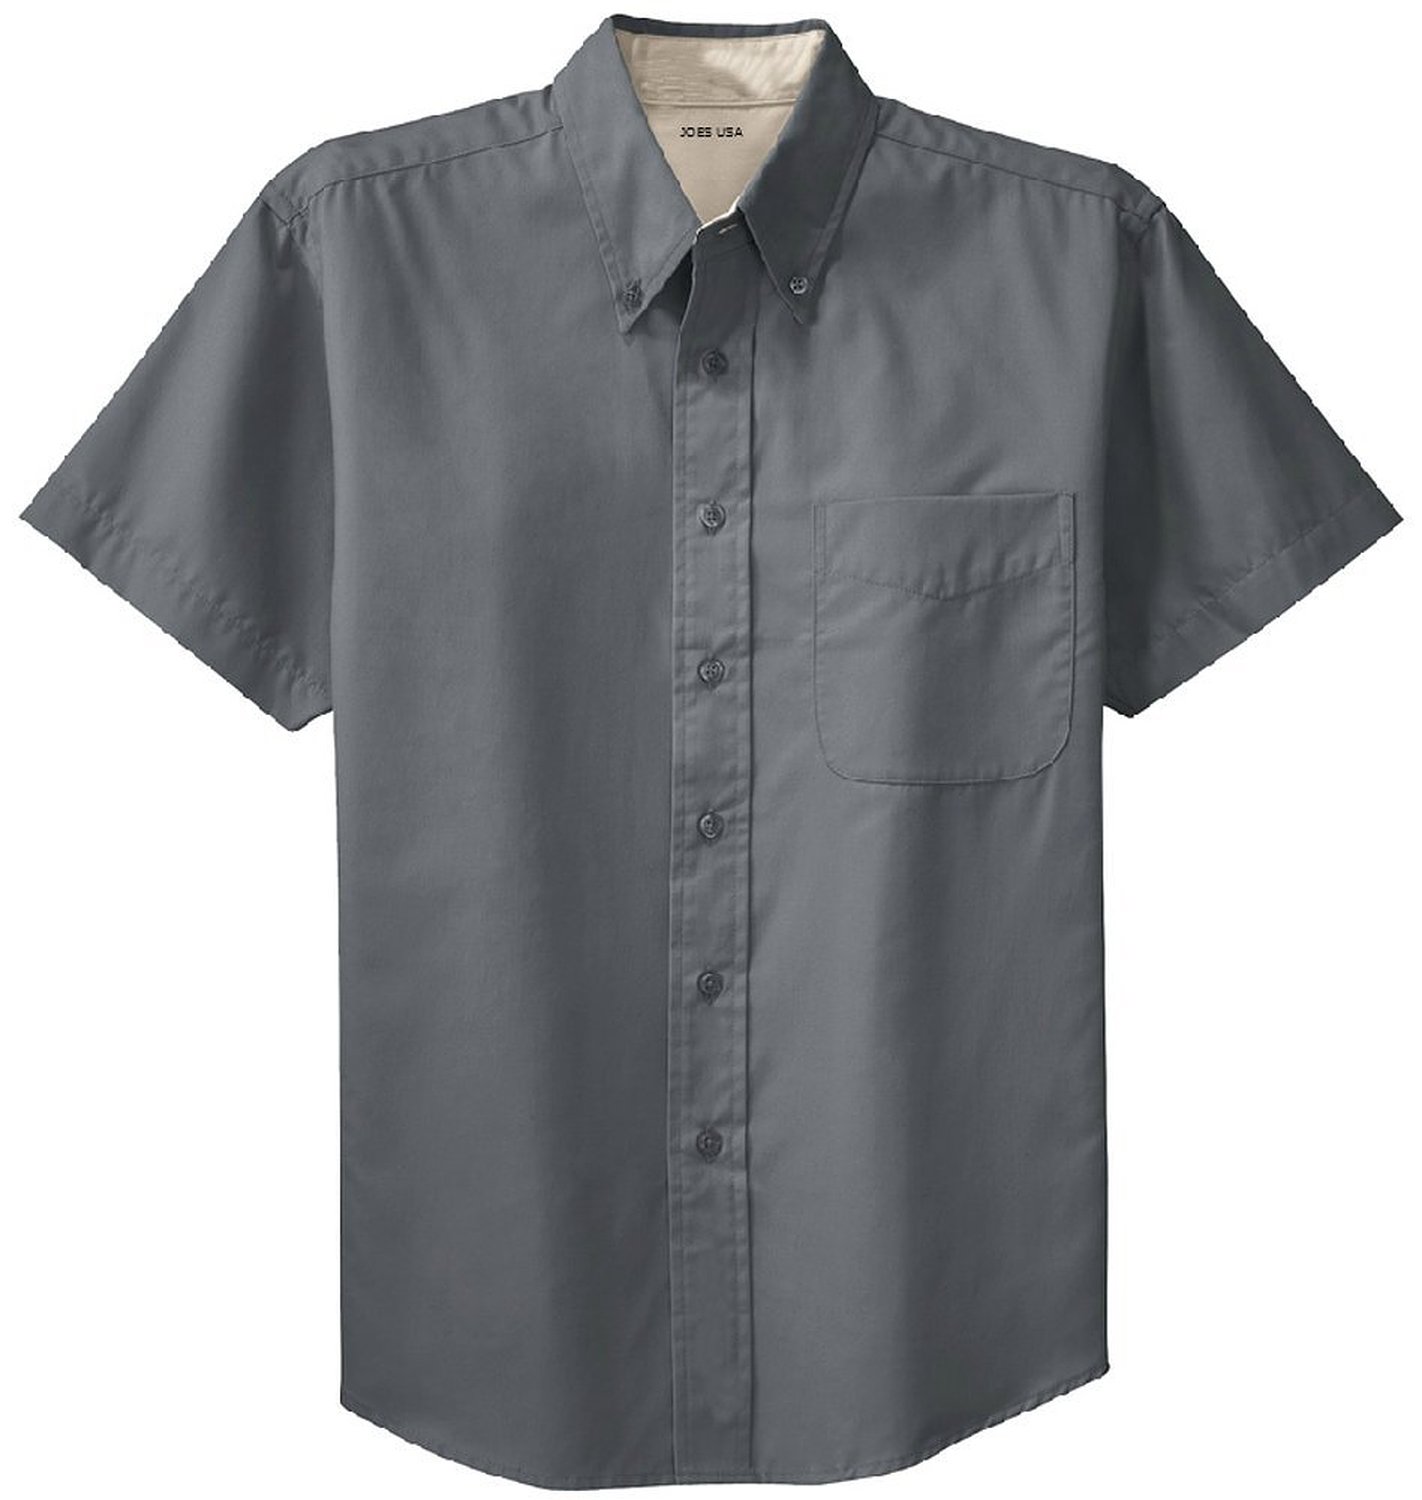 Men's Short Sleeve Wrinkle Resistant Easy Care Shirts in 32 Colors